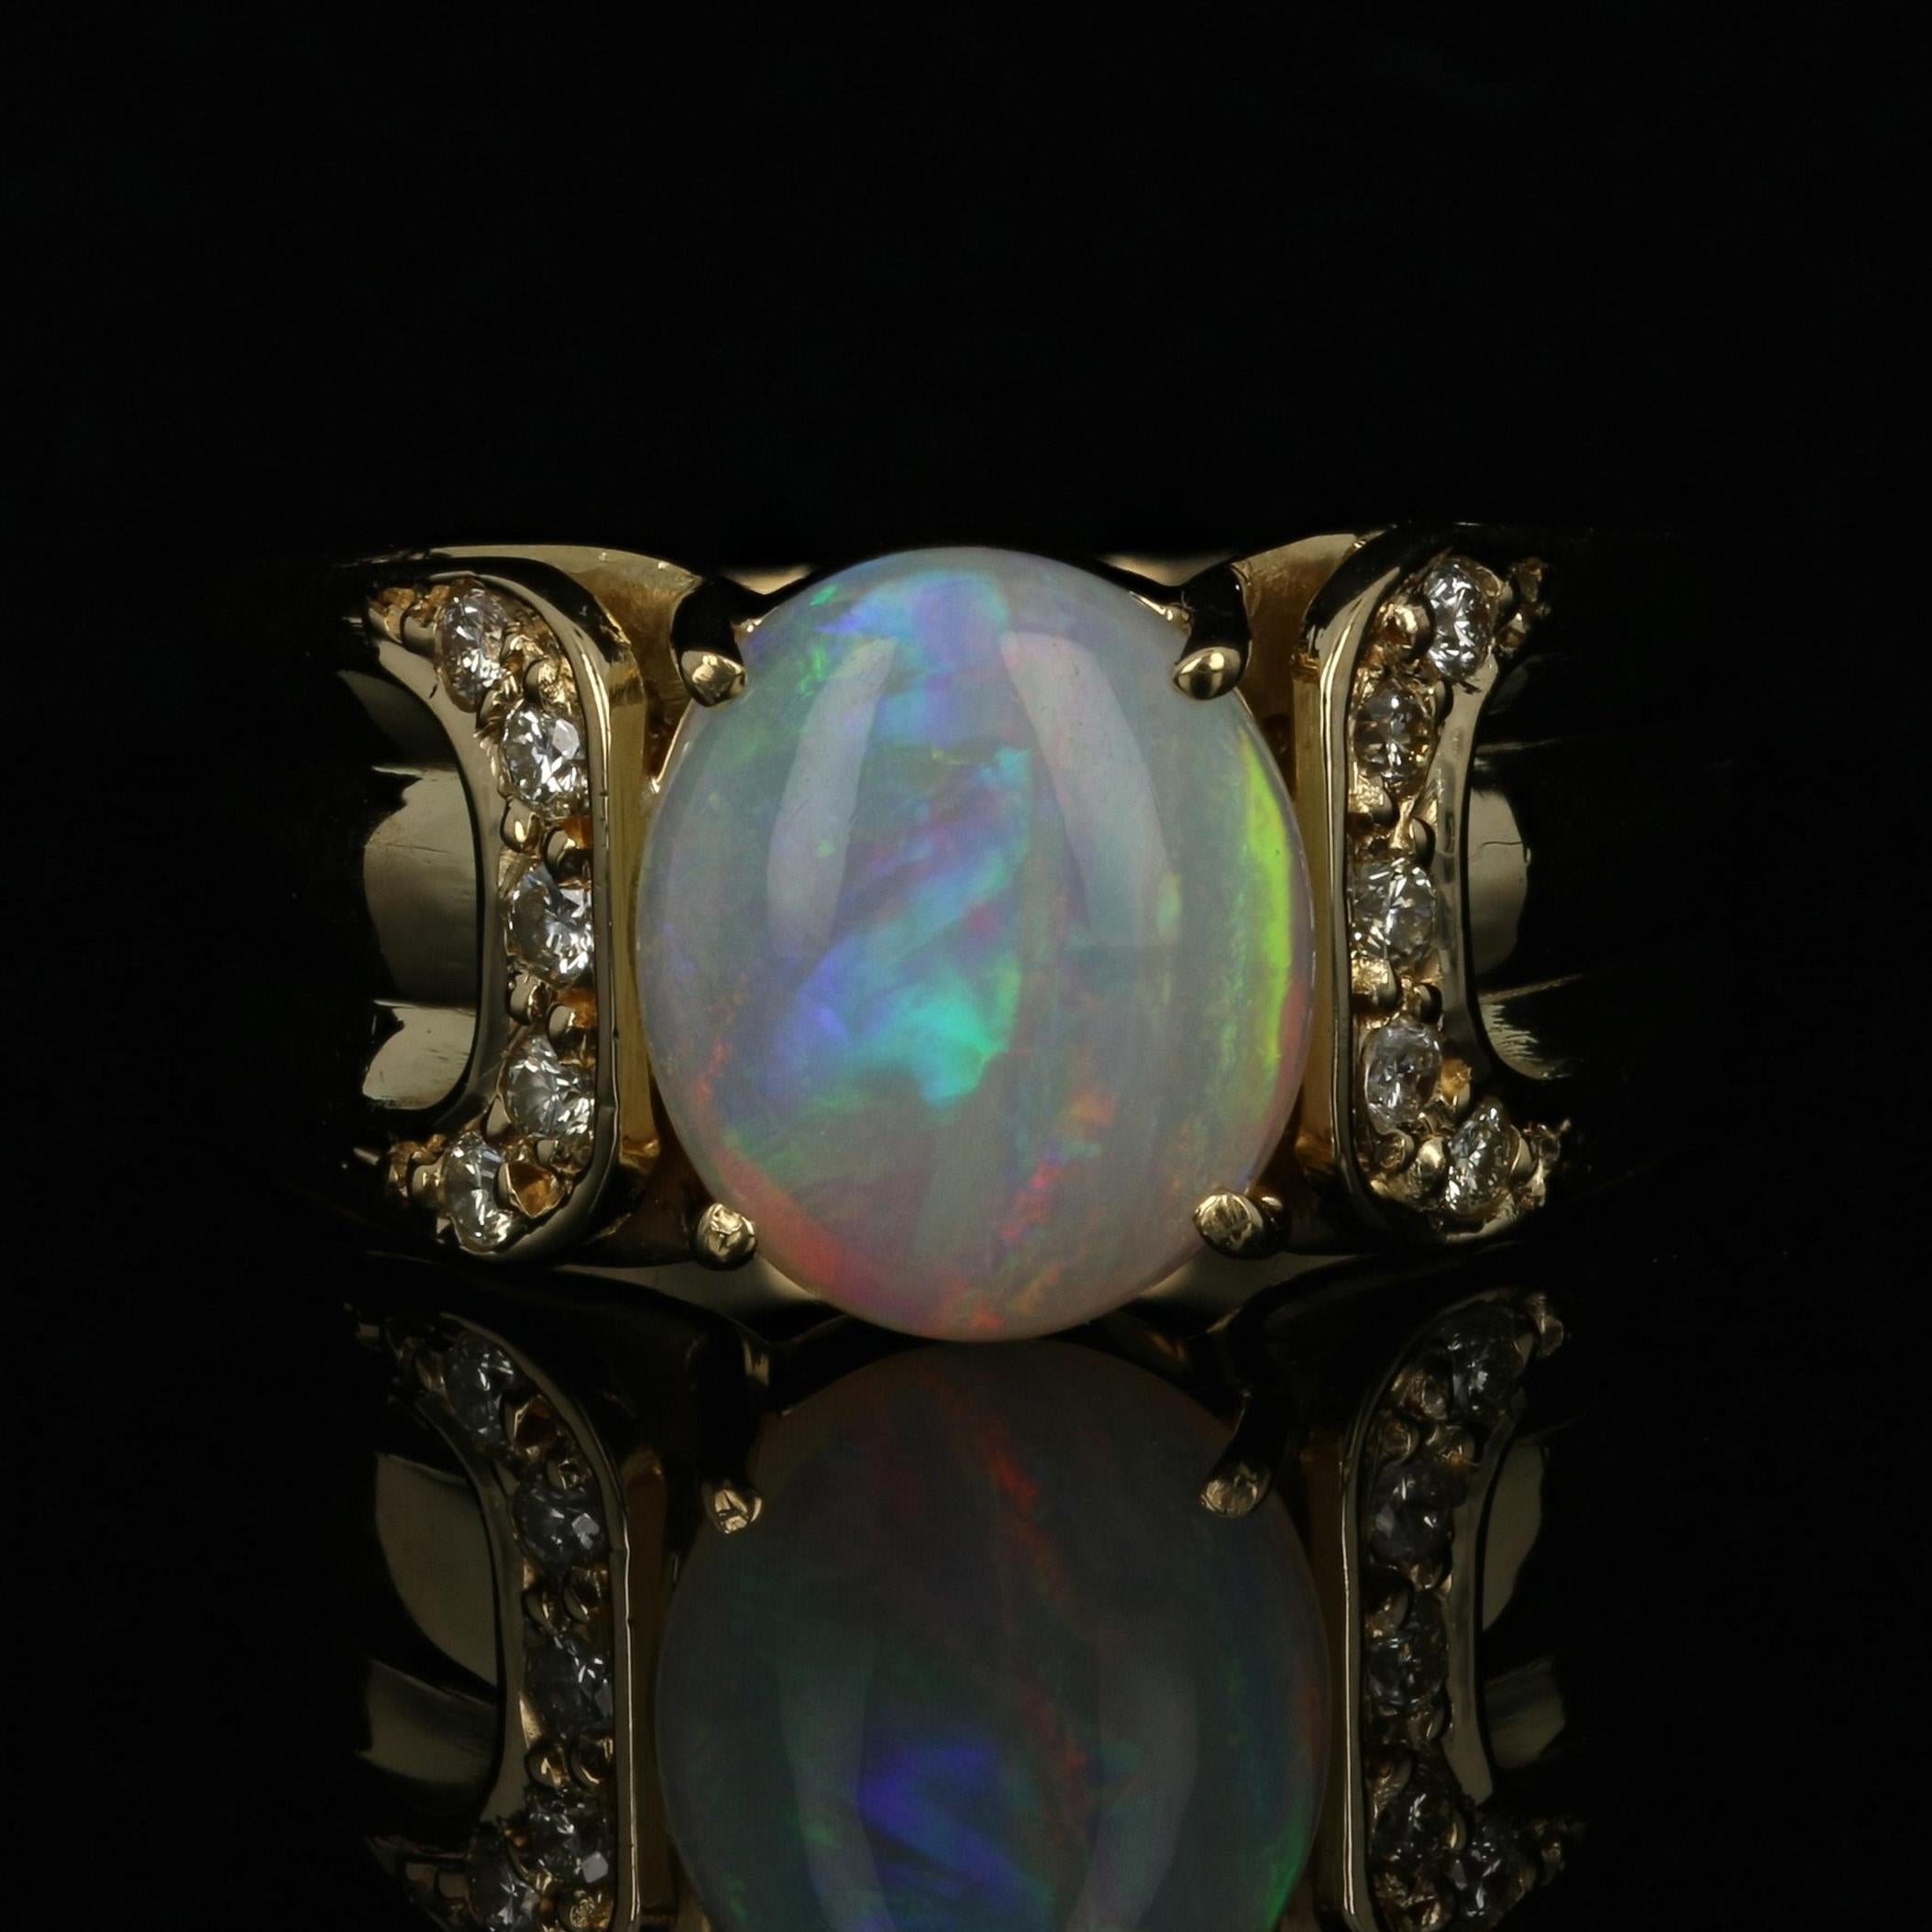 Size: 6 3/4
Sizing Fee: Can be sized up or down 2 sizes for $50

Metal Content: 18k Yellow Gold

Stone Information: 
Genuine Opal 
Carat(s): 1.60ct
Cut: Oval Cabochon
Size: 9.7mm x 8.2mm
Origin: Brazil

Natural Diamonds
Carat(s): .15ctw
Cut: Round